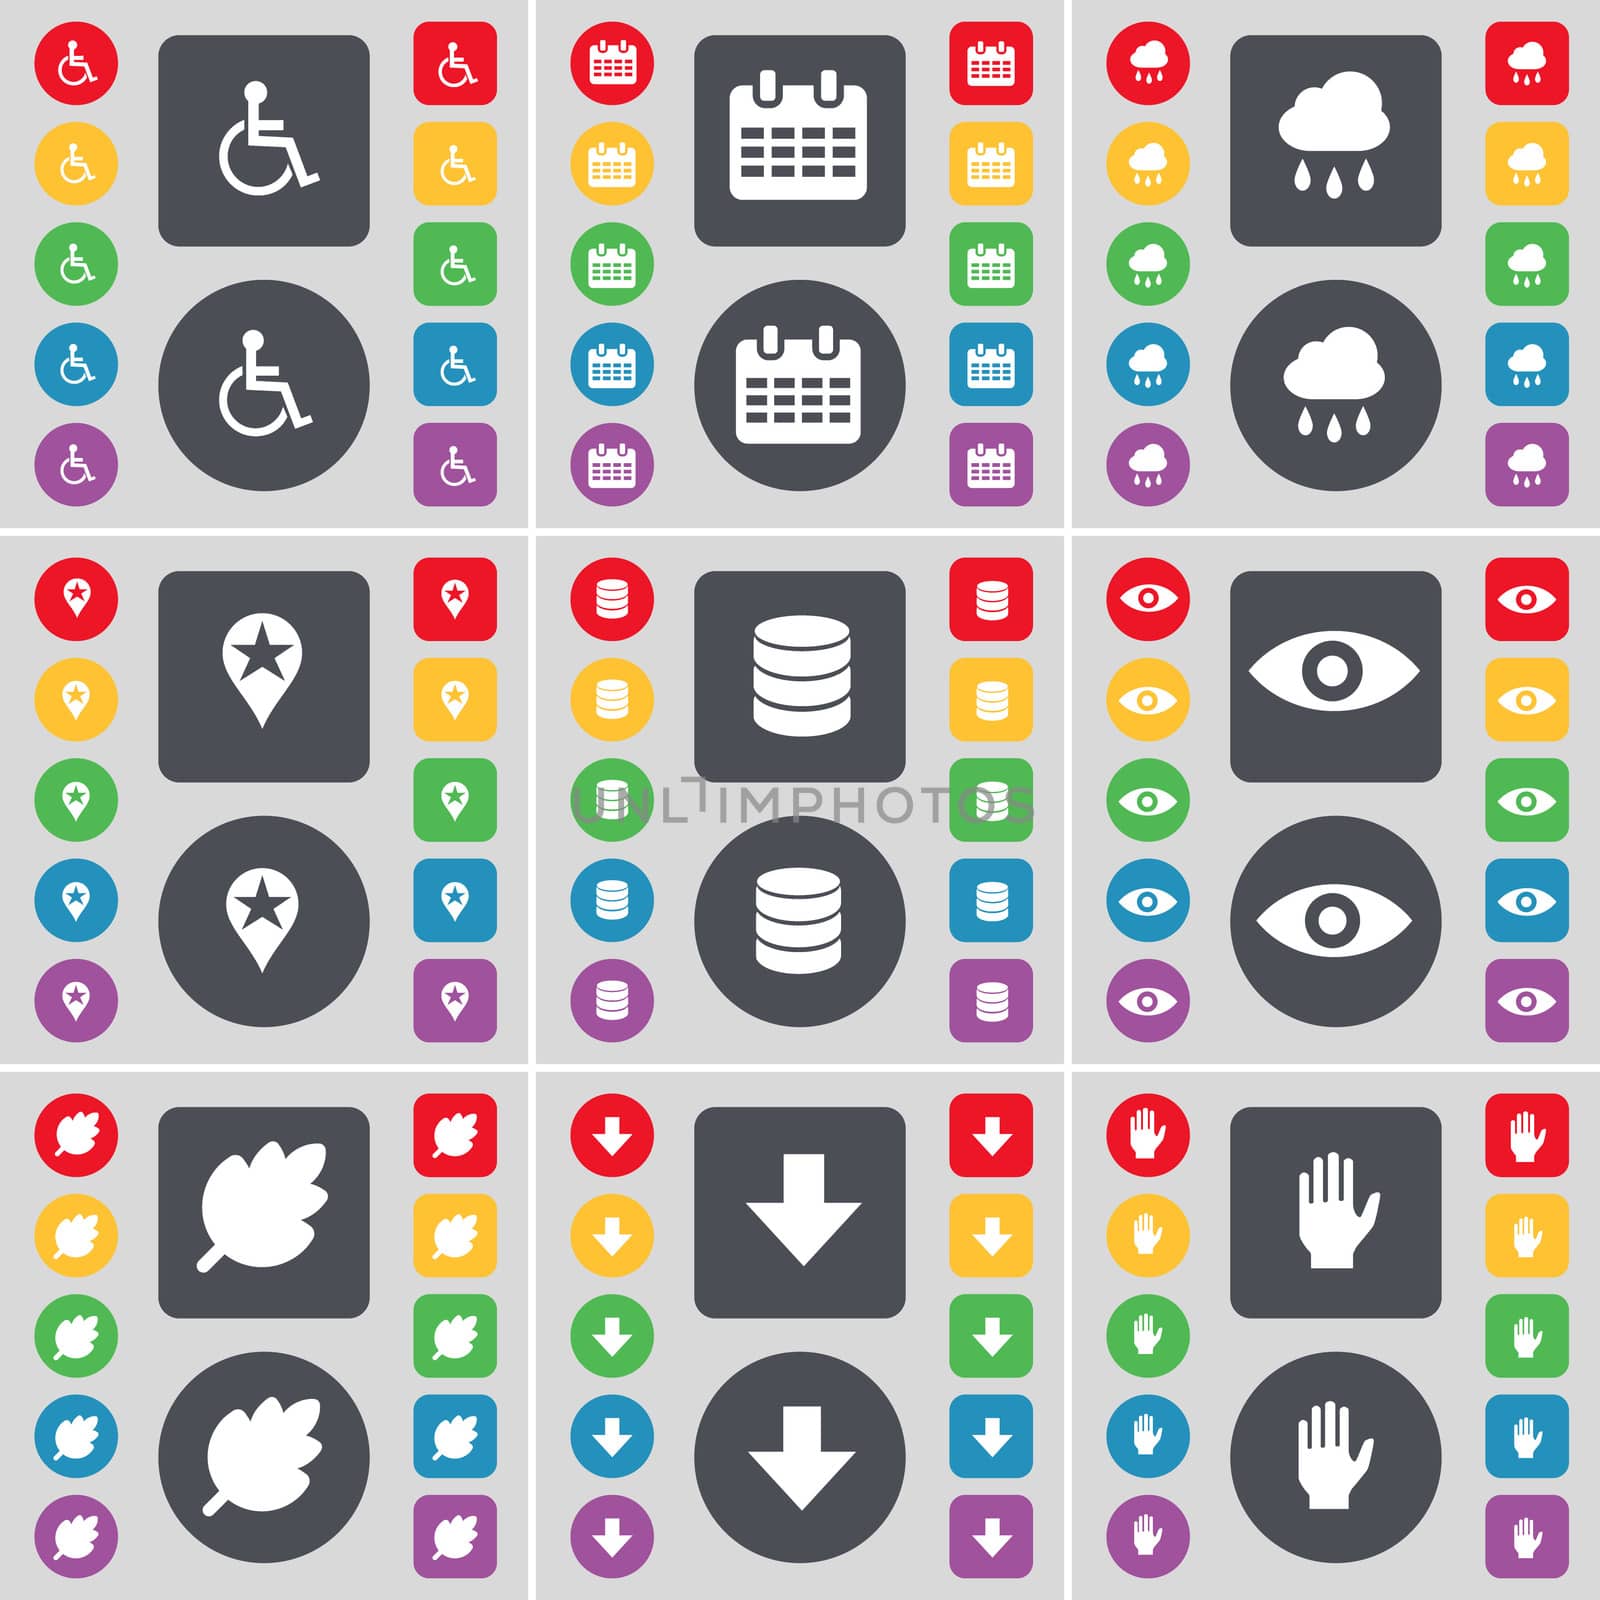 Disabled person, Calendar, Cloud, Checkpoint, Database, Vision, Leaf, Arrow down, Hand icon symbol. A large set of flat, colored buttons for your design. illustration